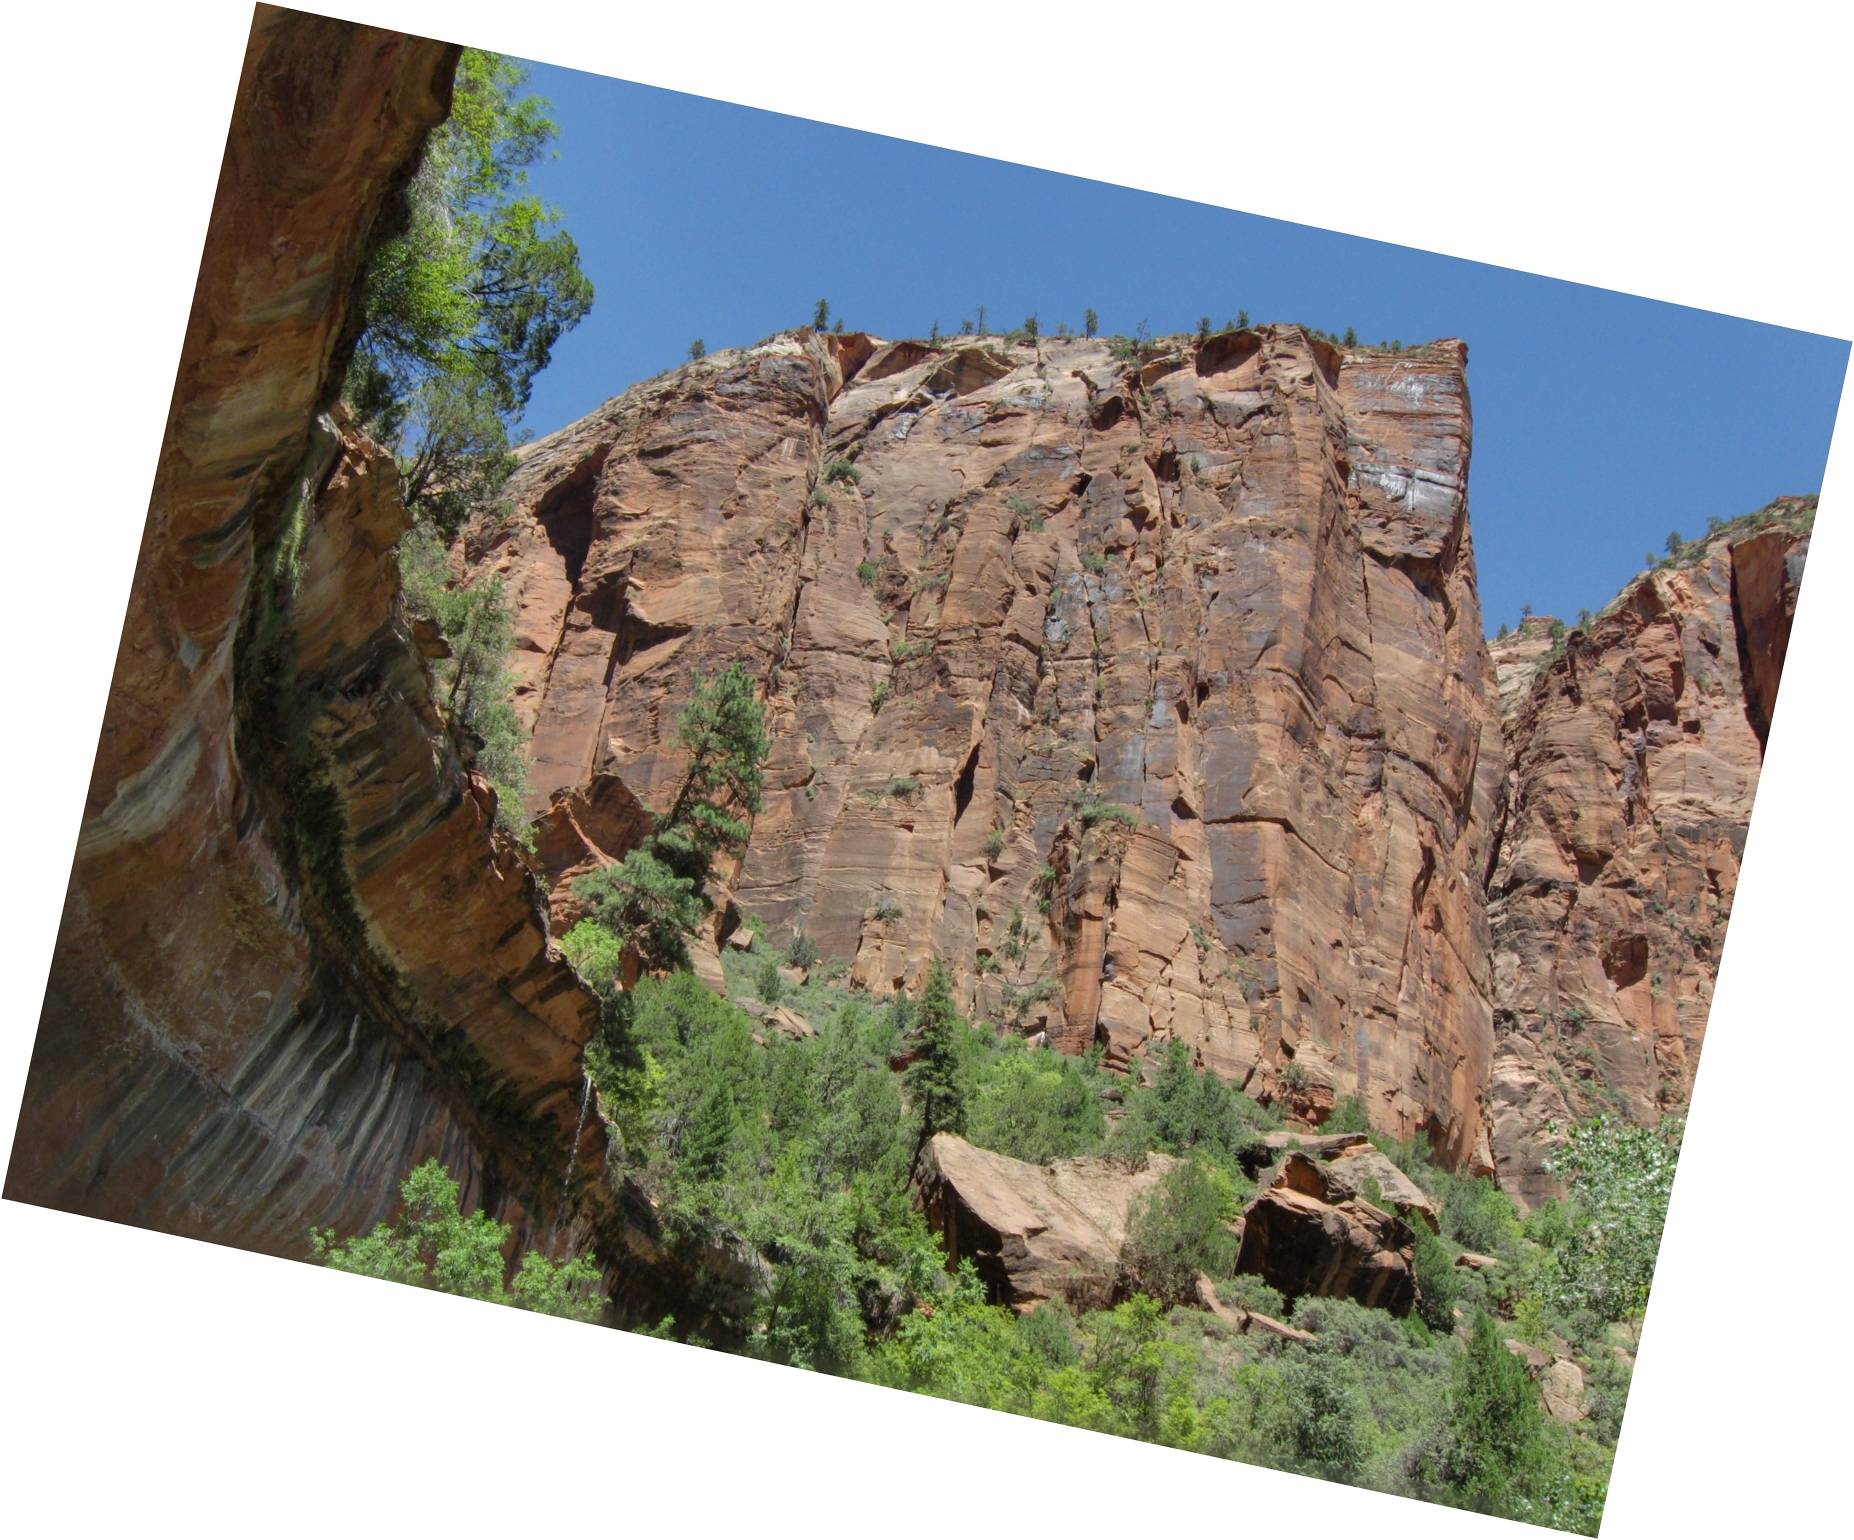 Image: The western side of the canyon as seen from the Lower Emerald Pool